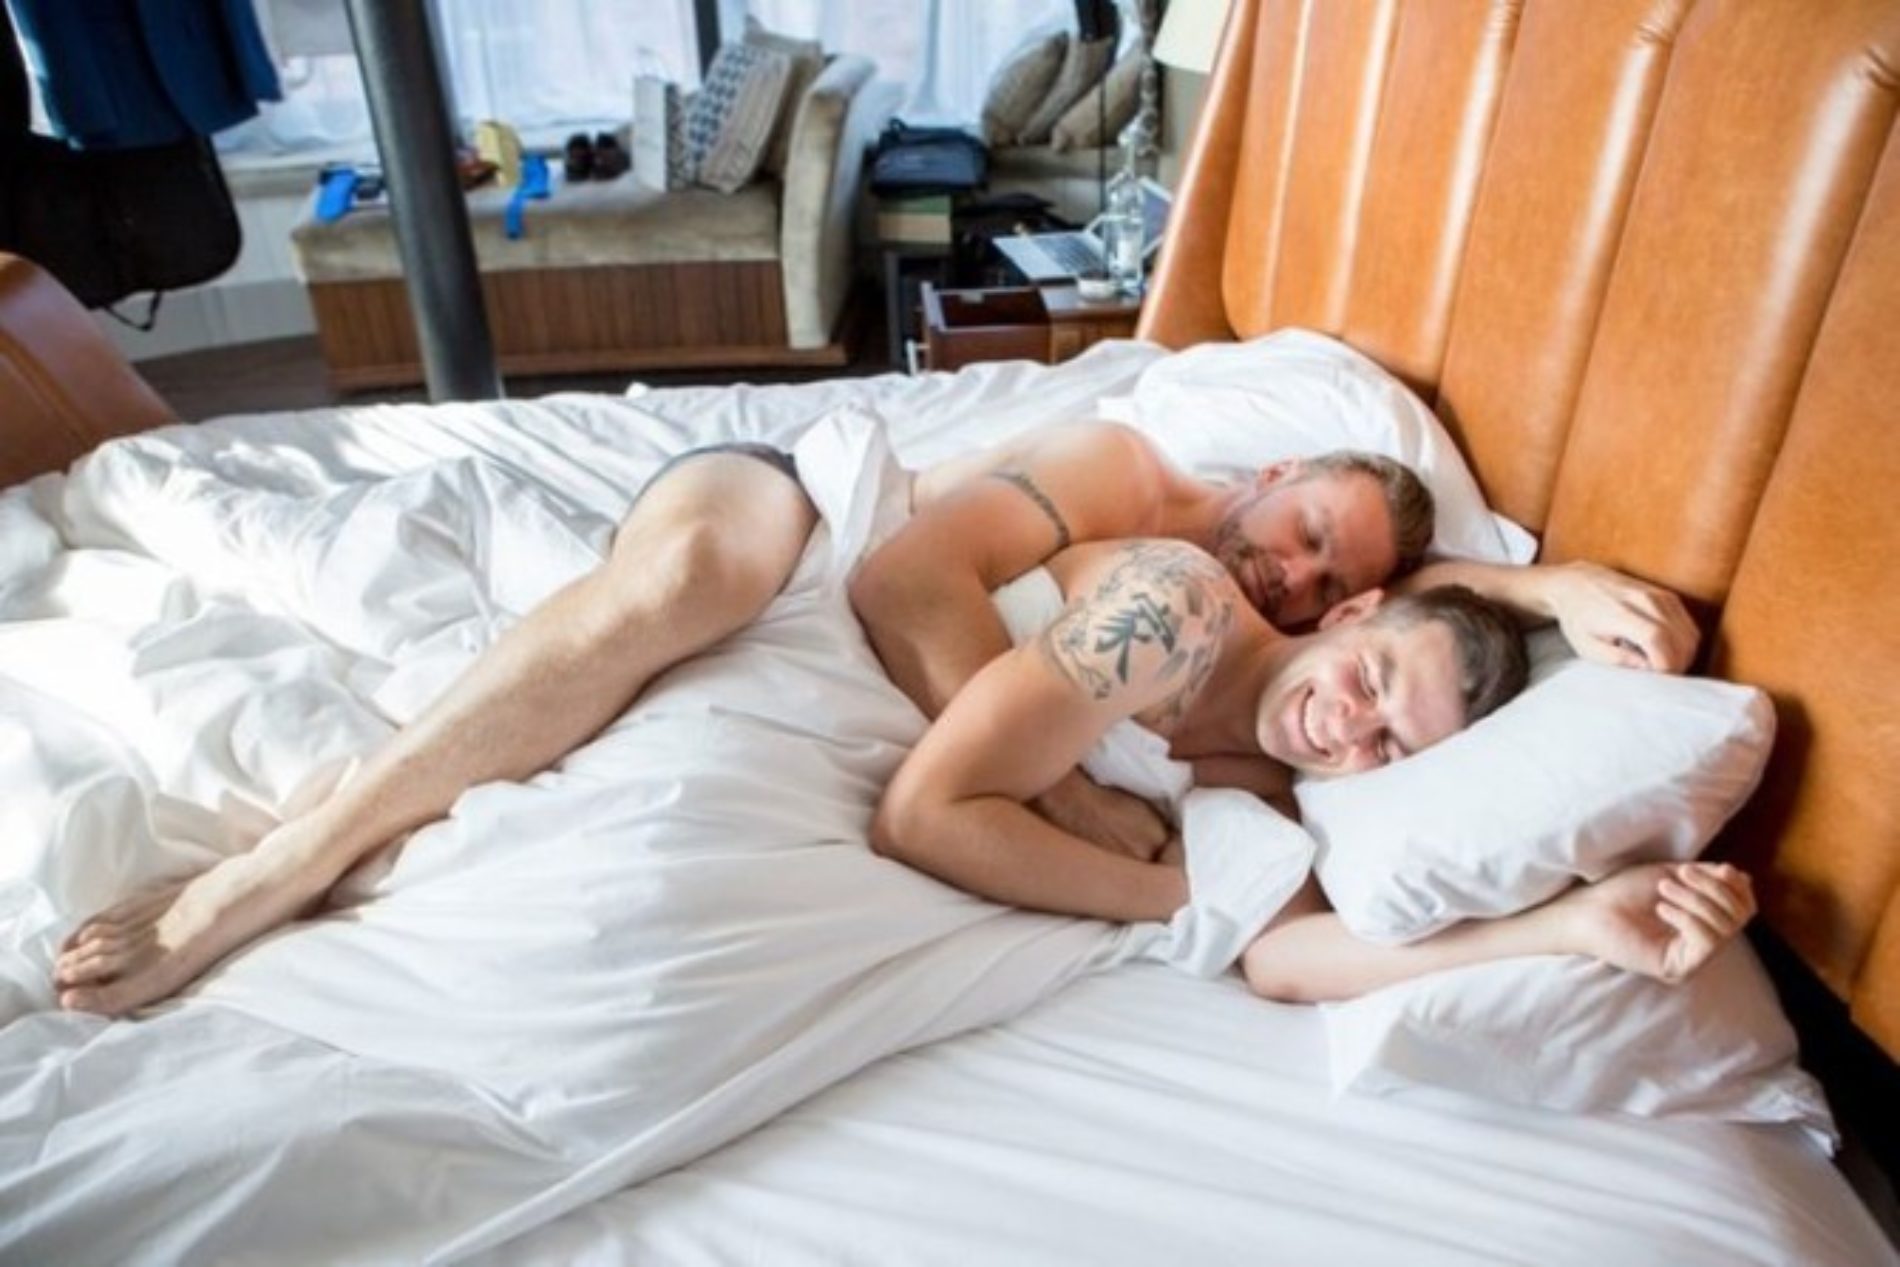 Before He Wed His Wife, This Groom Cuddled Hard With His Best Man